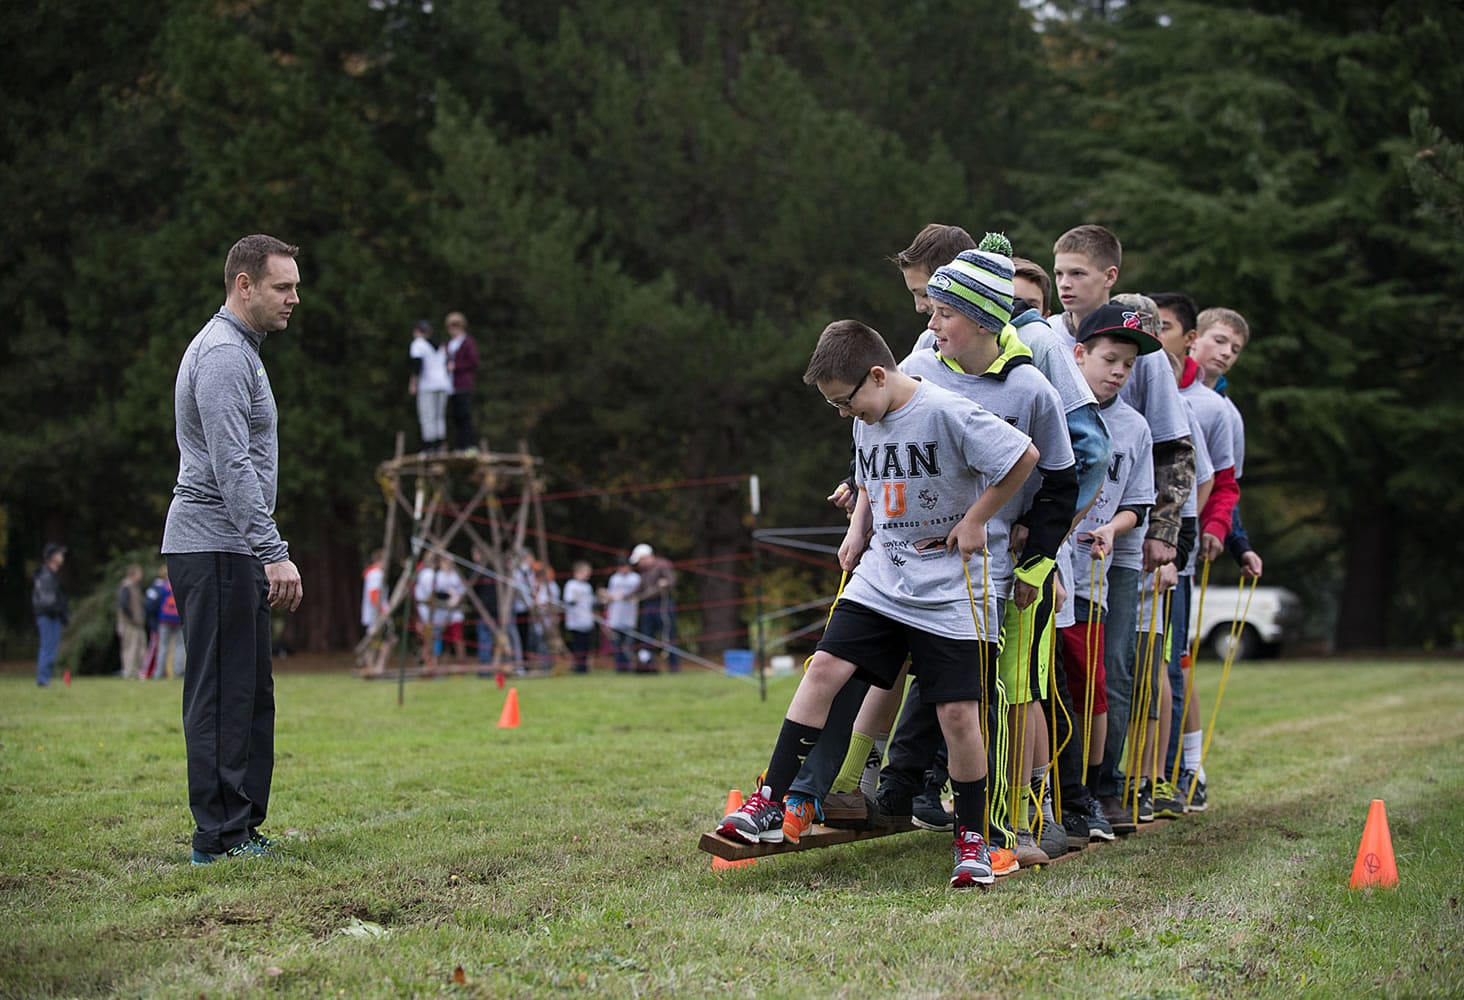 Blake Perkins of Washougal offers encouragement to participants as they take part in a team-building activity for eighth-grade boys Thursday afternoon at Jemtegaard Middle School.